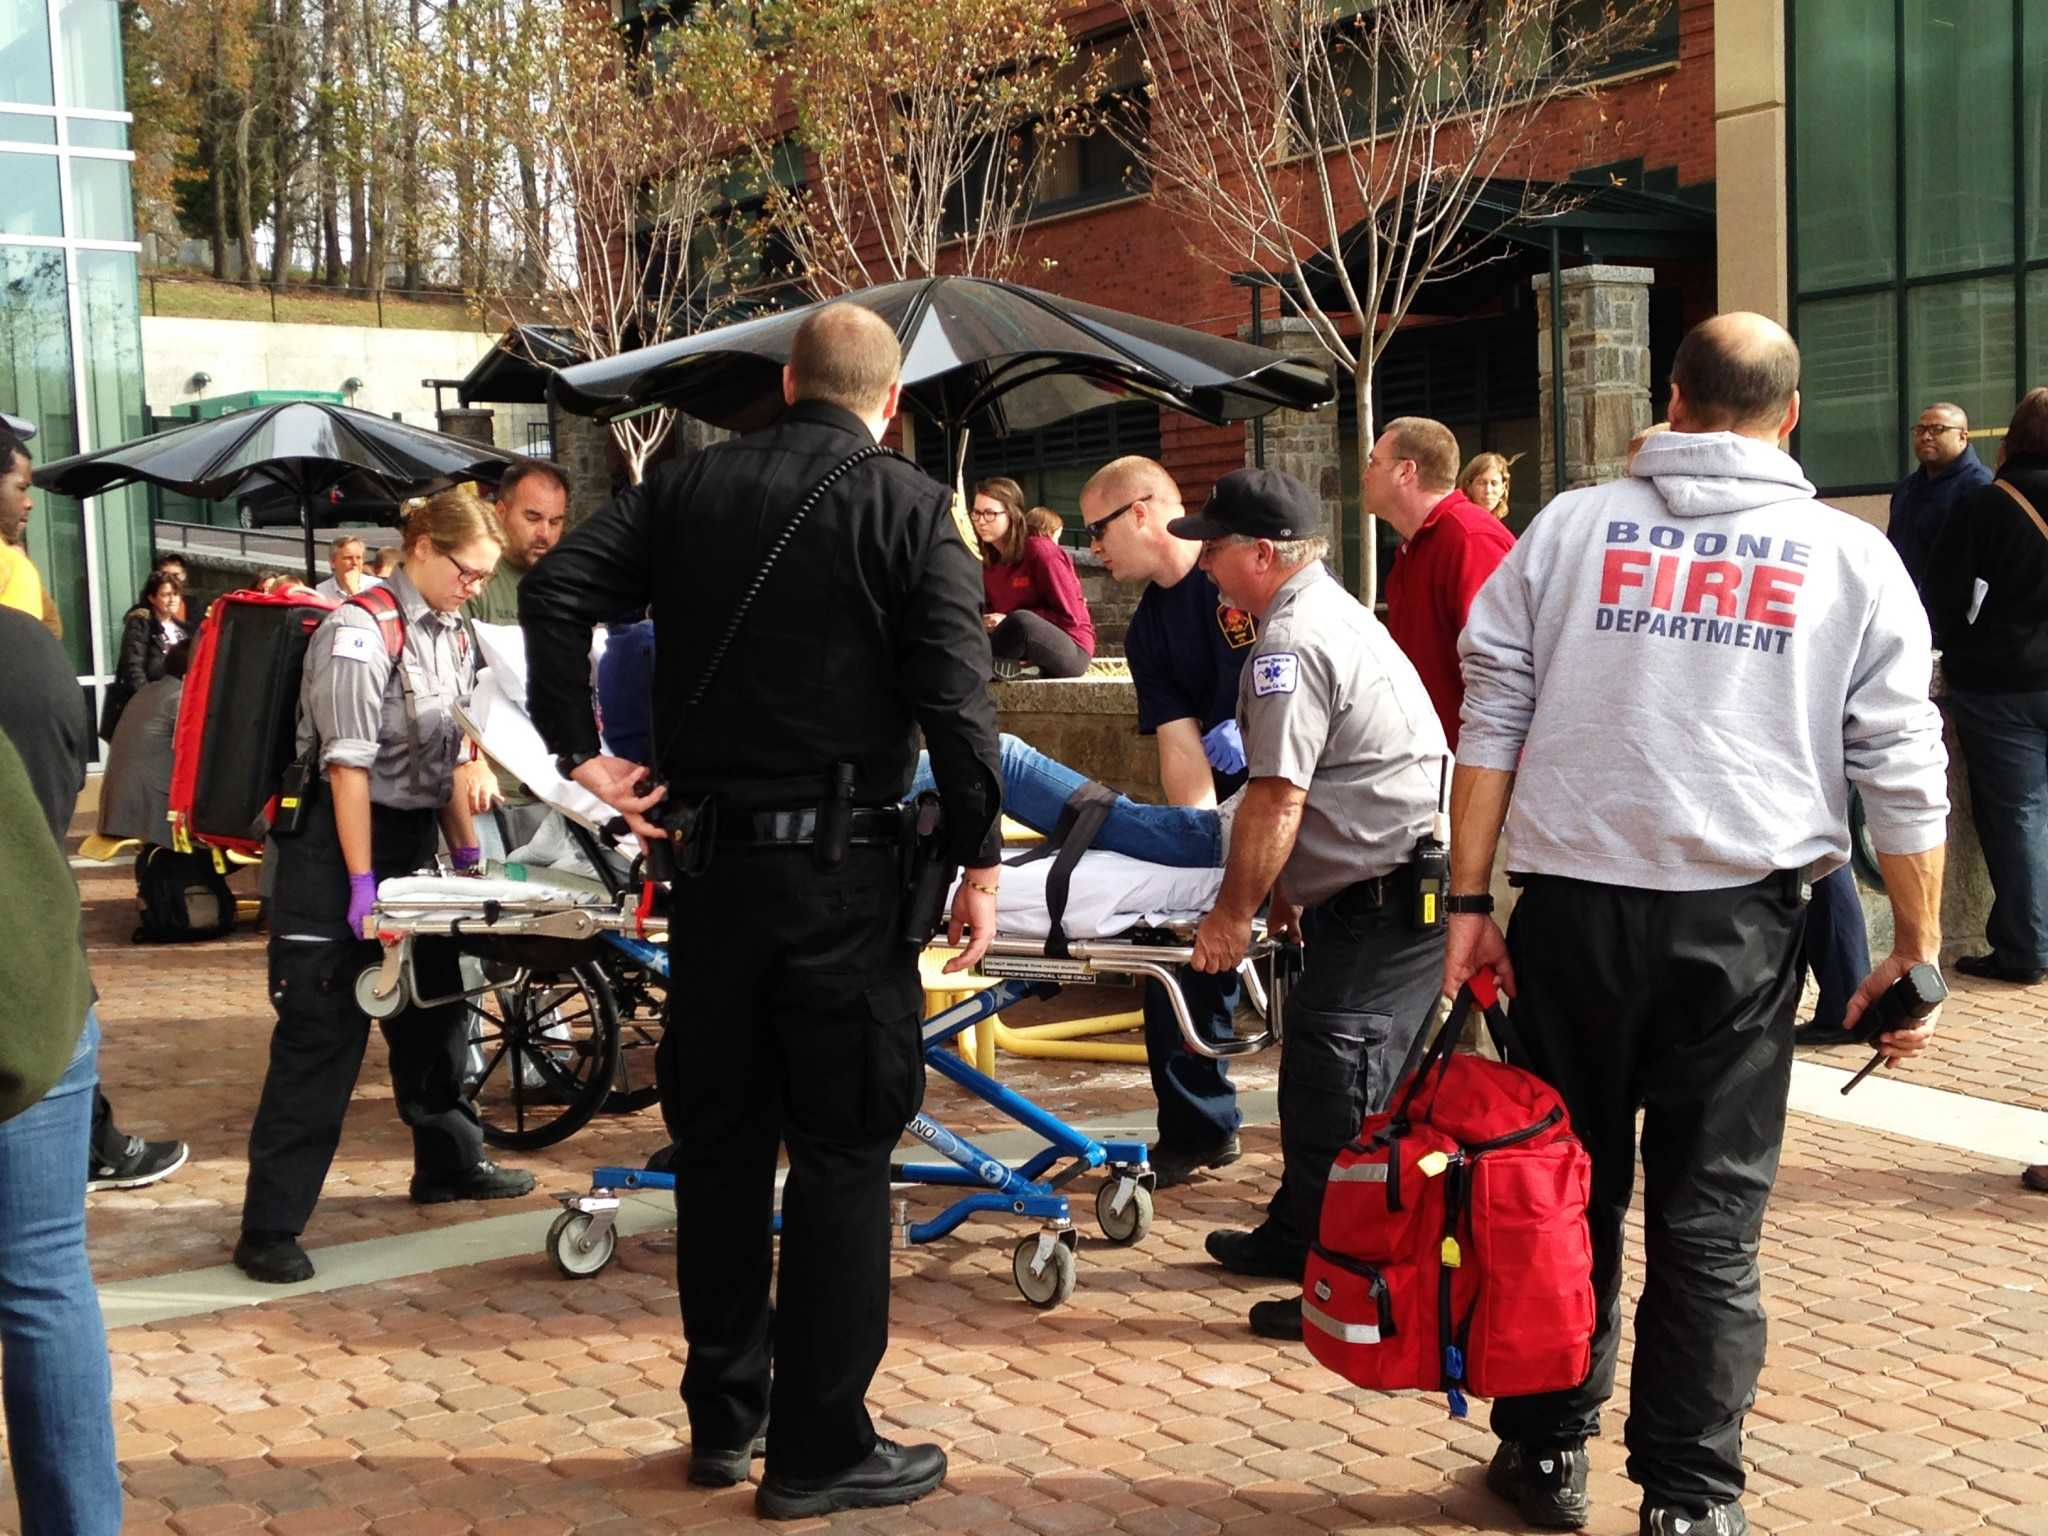 An unnamed student was taken out of Plemmons Student Union in a wheelchair and loaded onto a stretcher after a 911 call was made. The student refused treatment and walked off on her own.